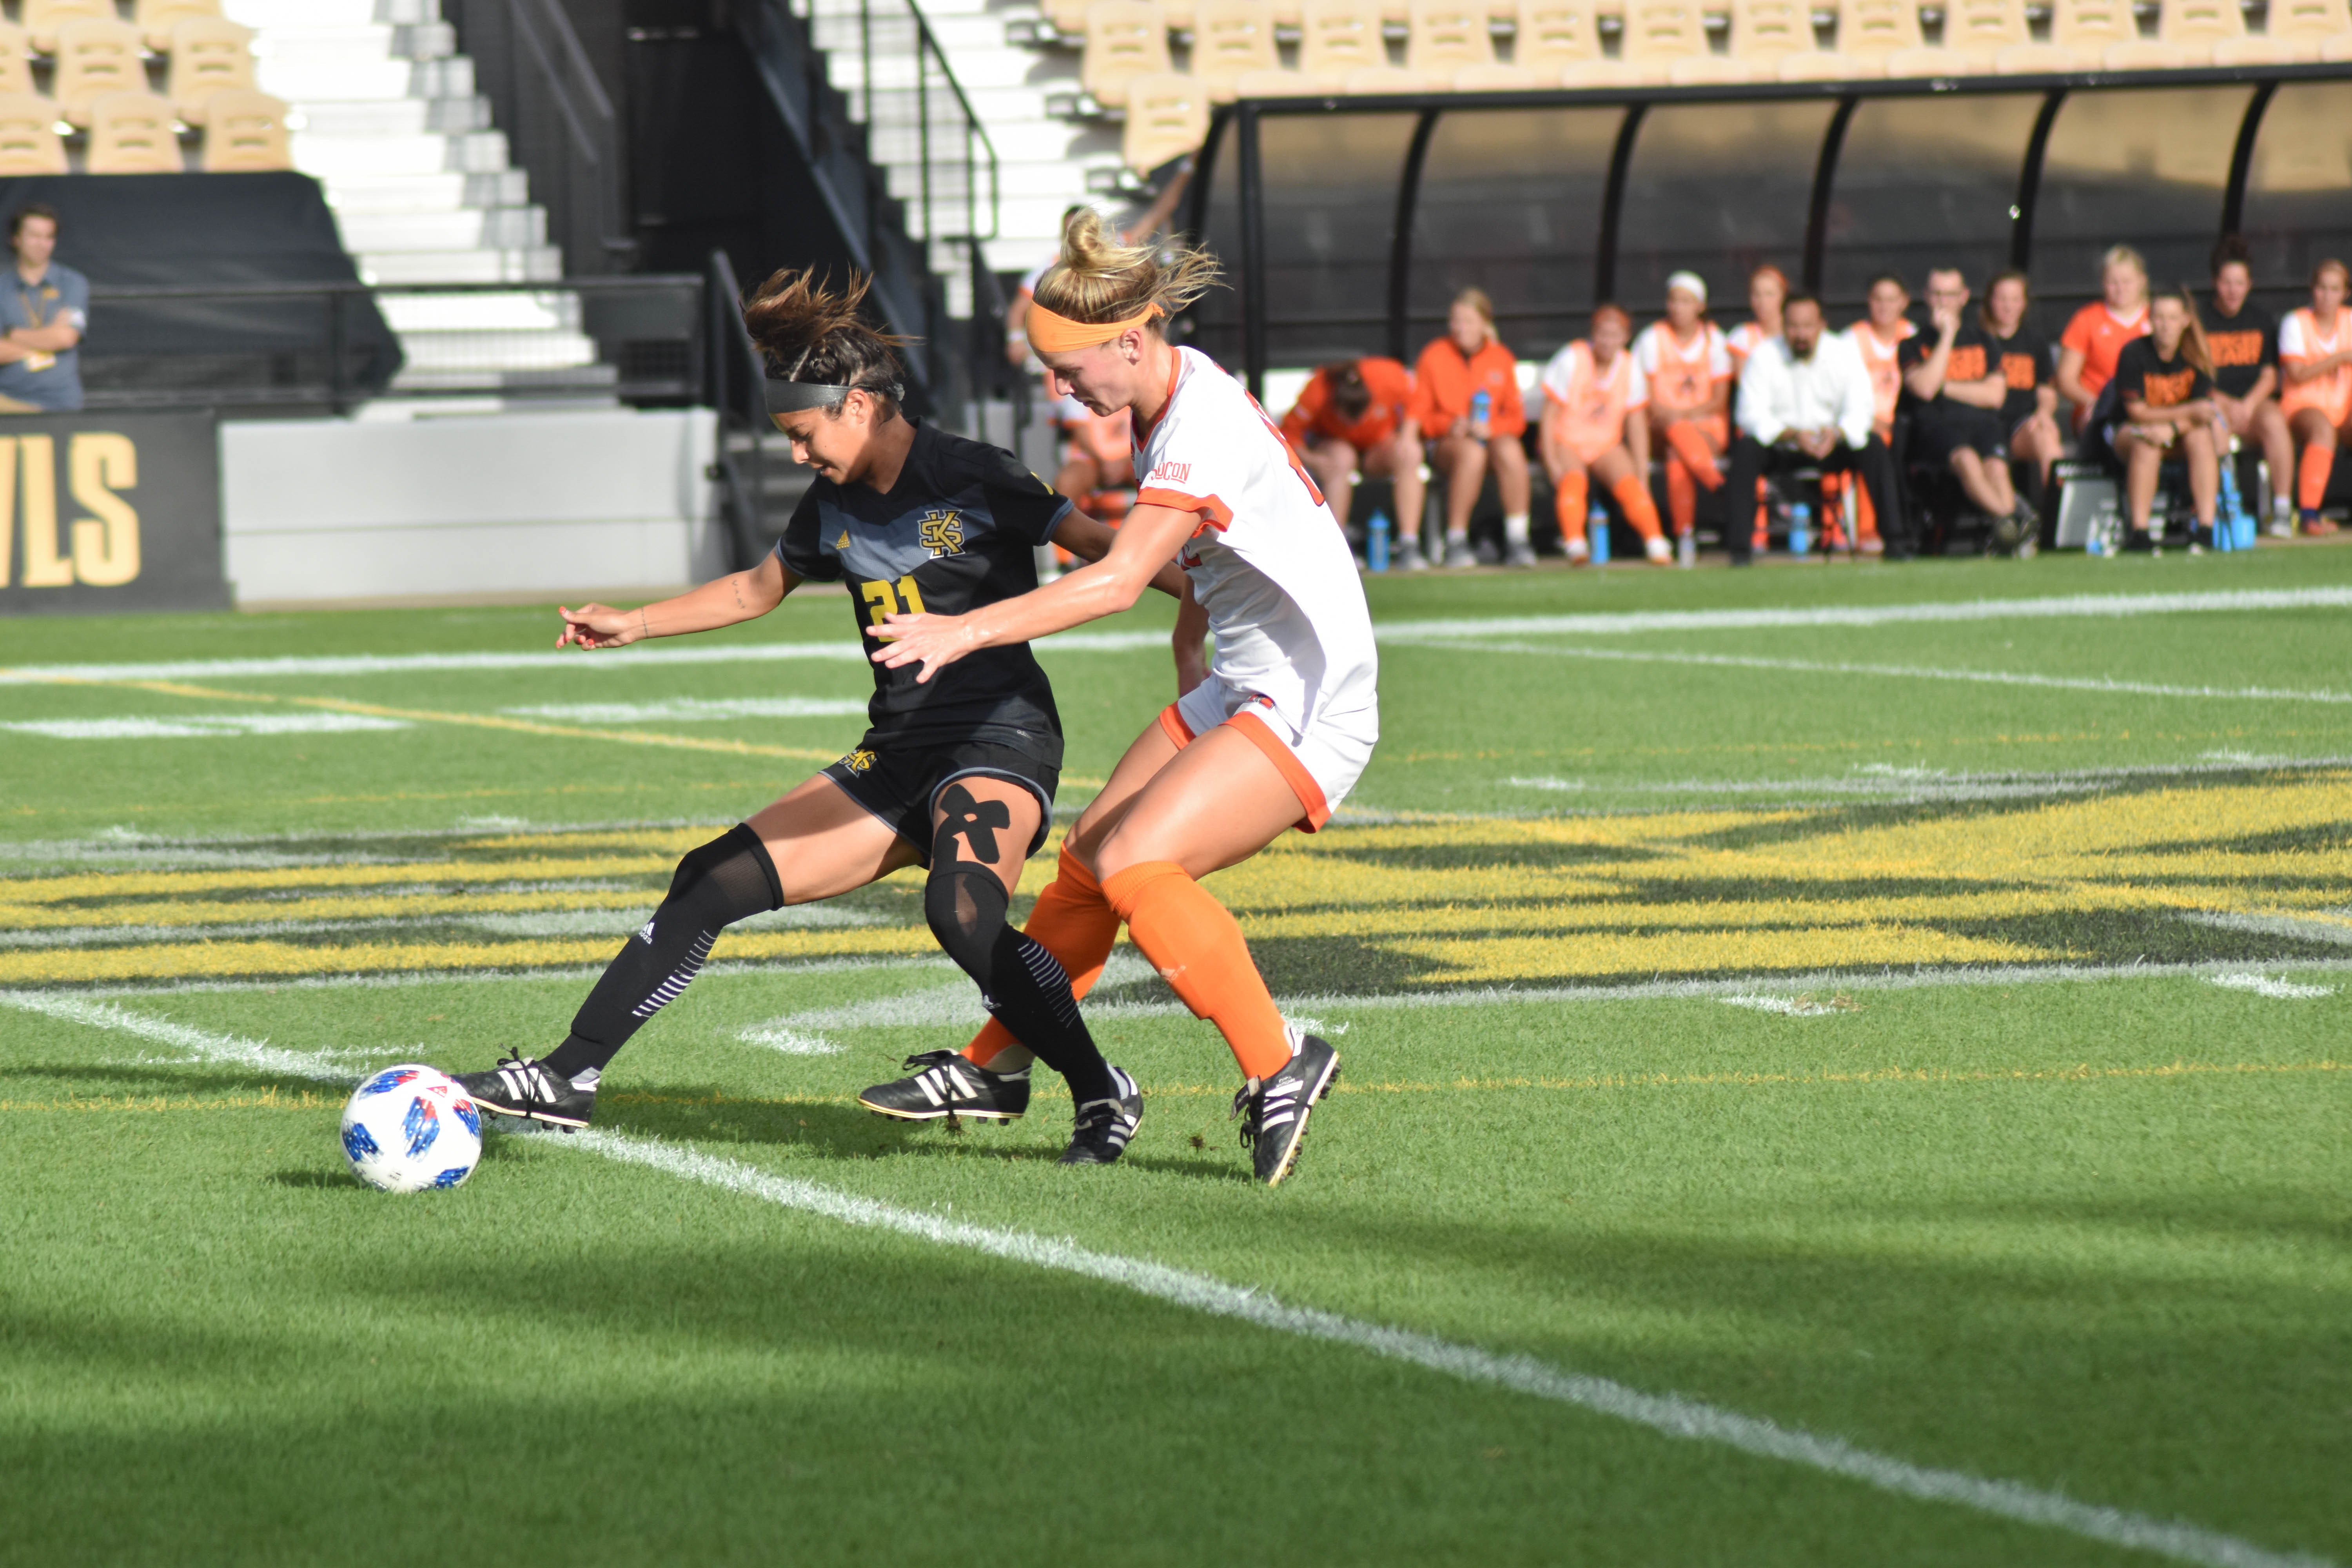 Winning streak ends for soccer as conference schedule looms